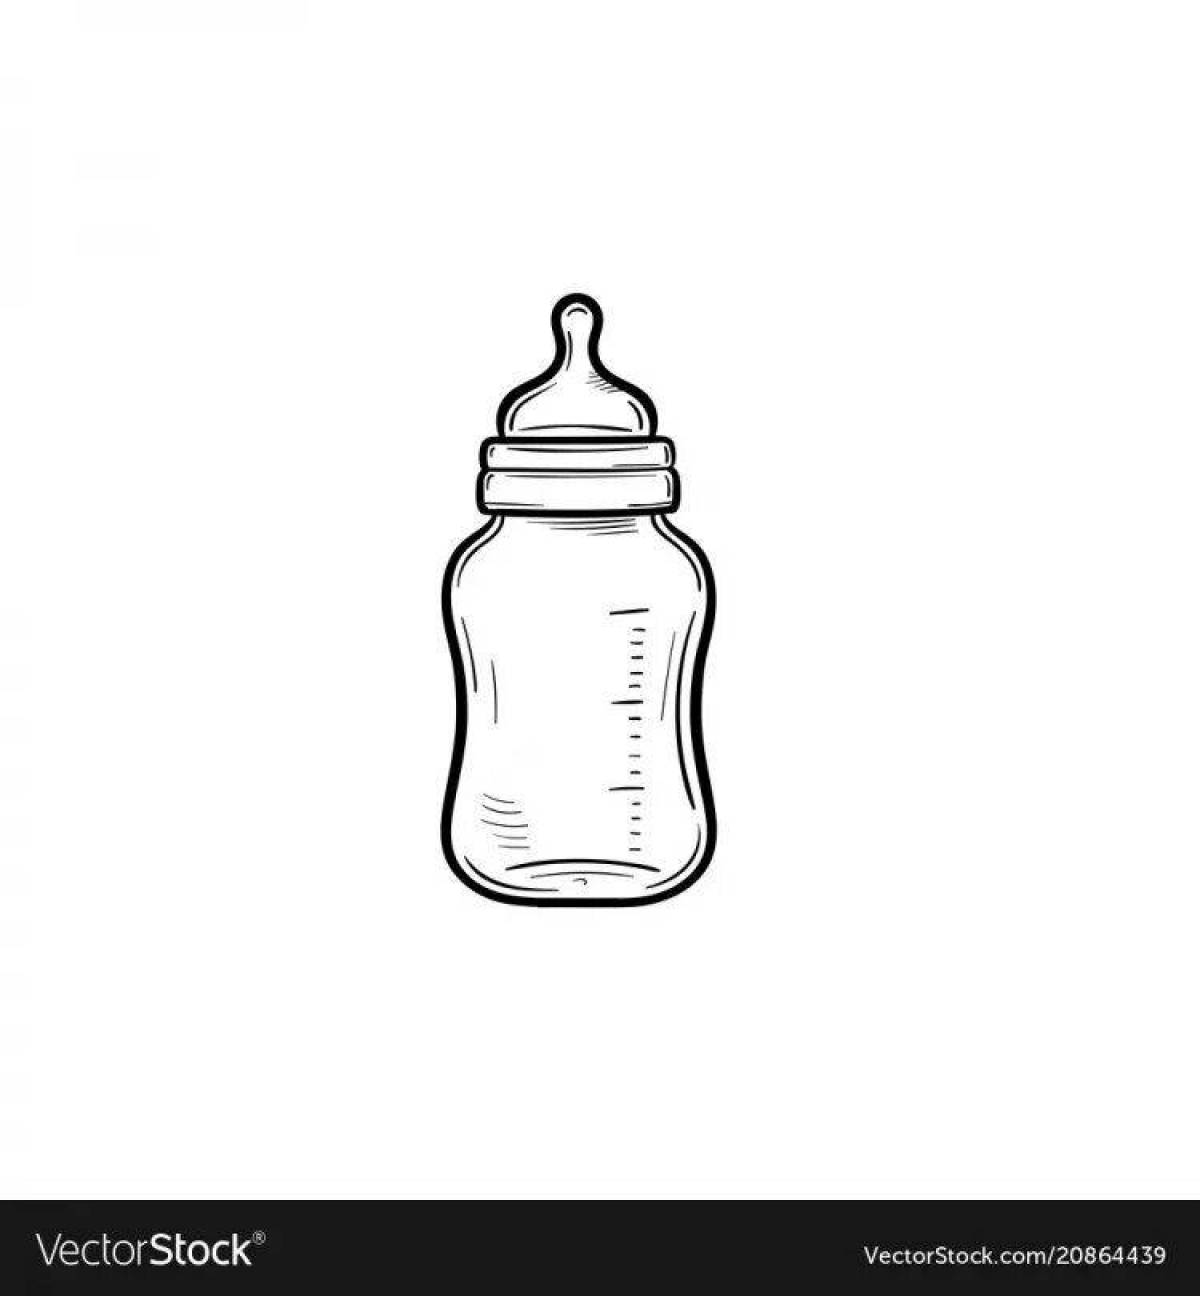 Glowing bottle coloring page